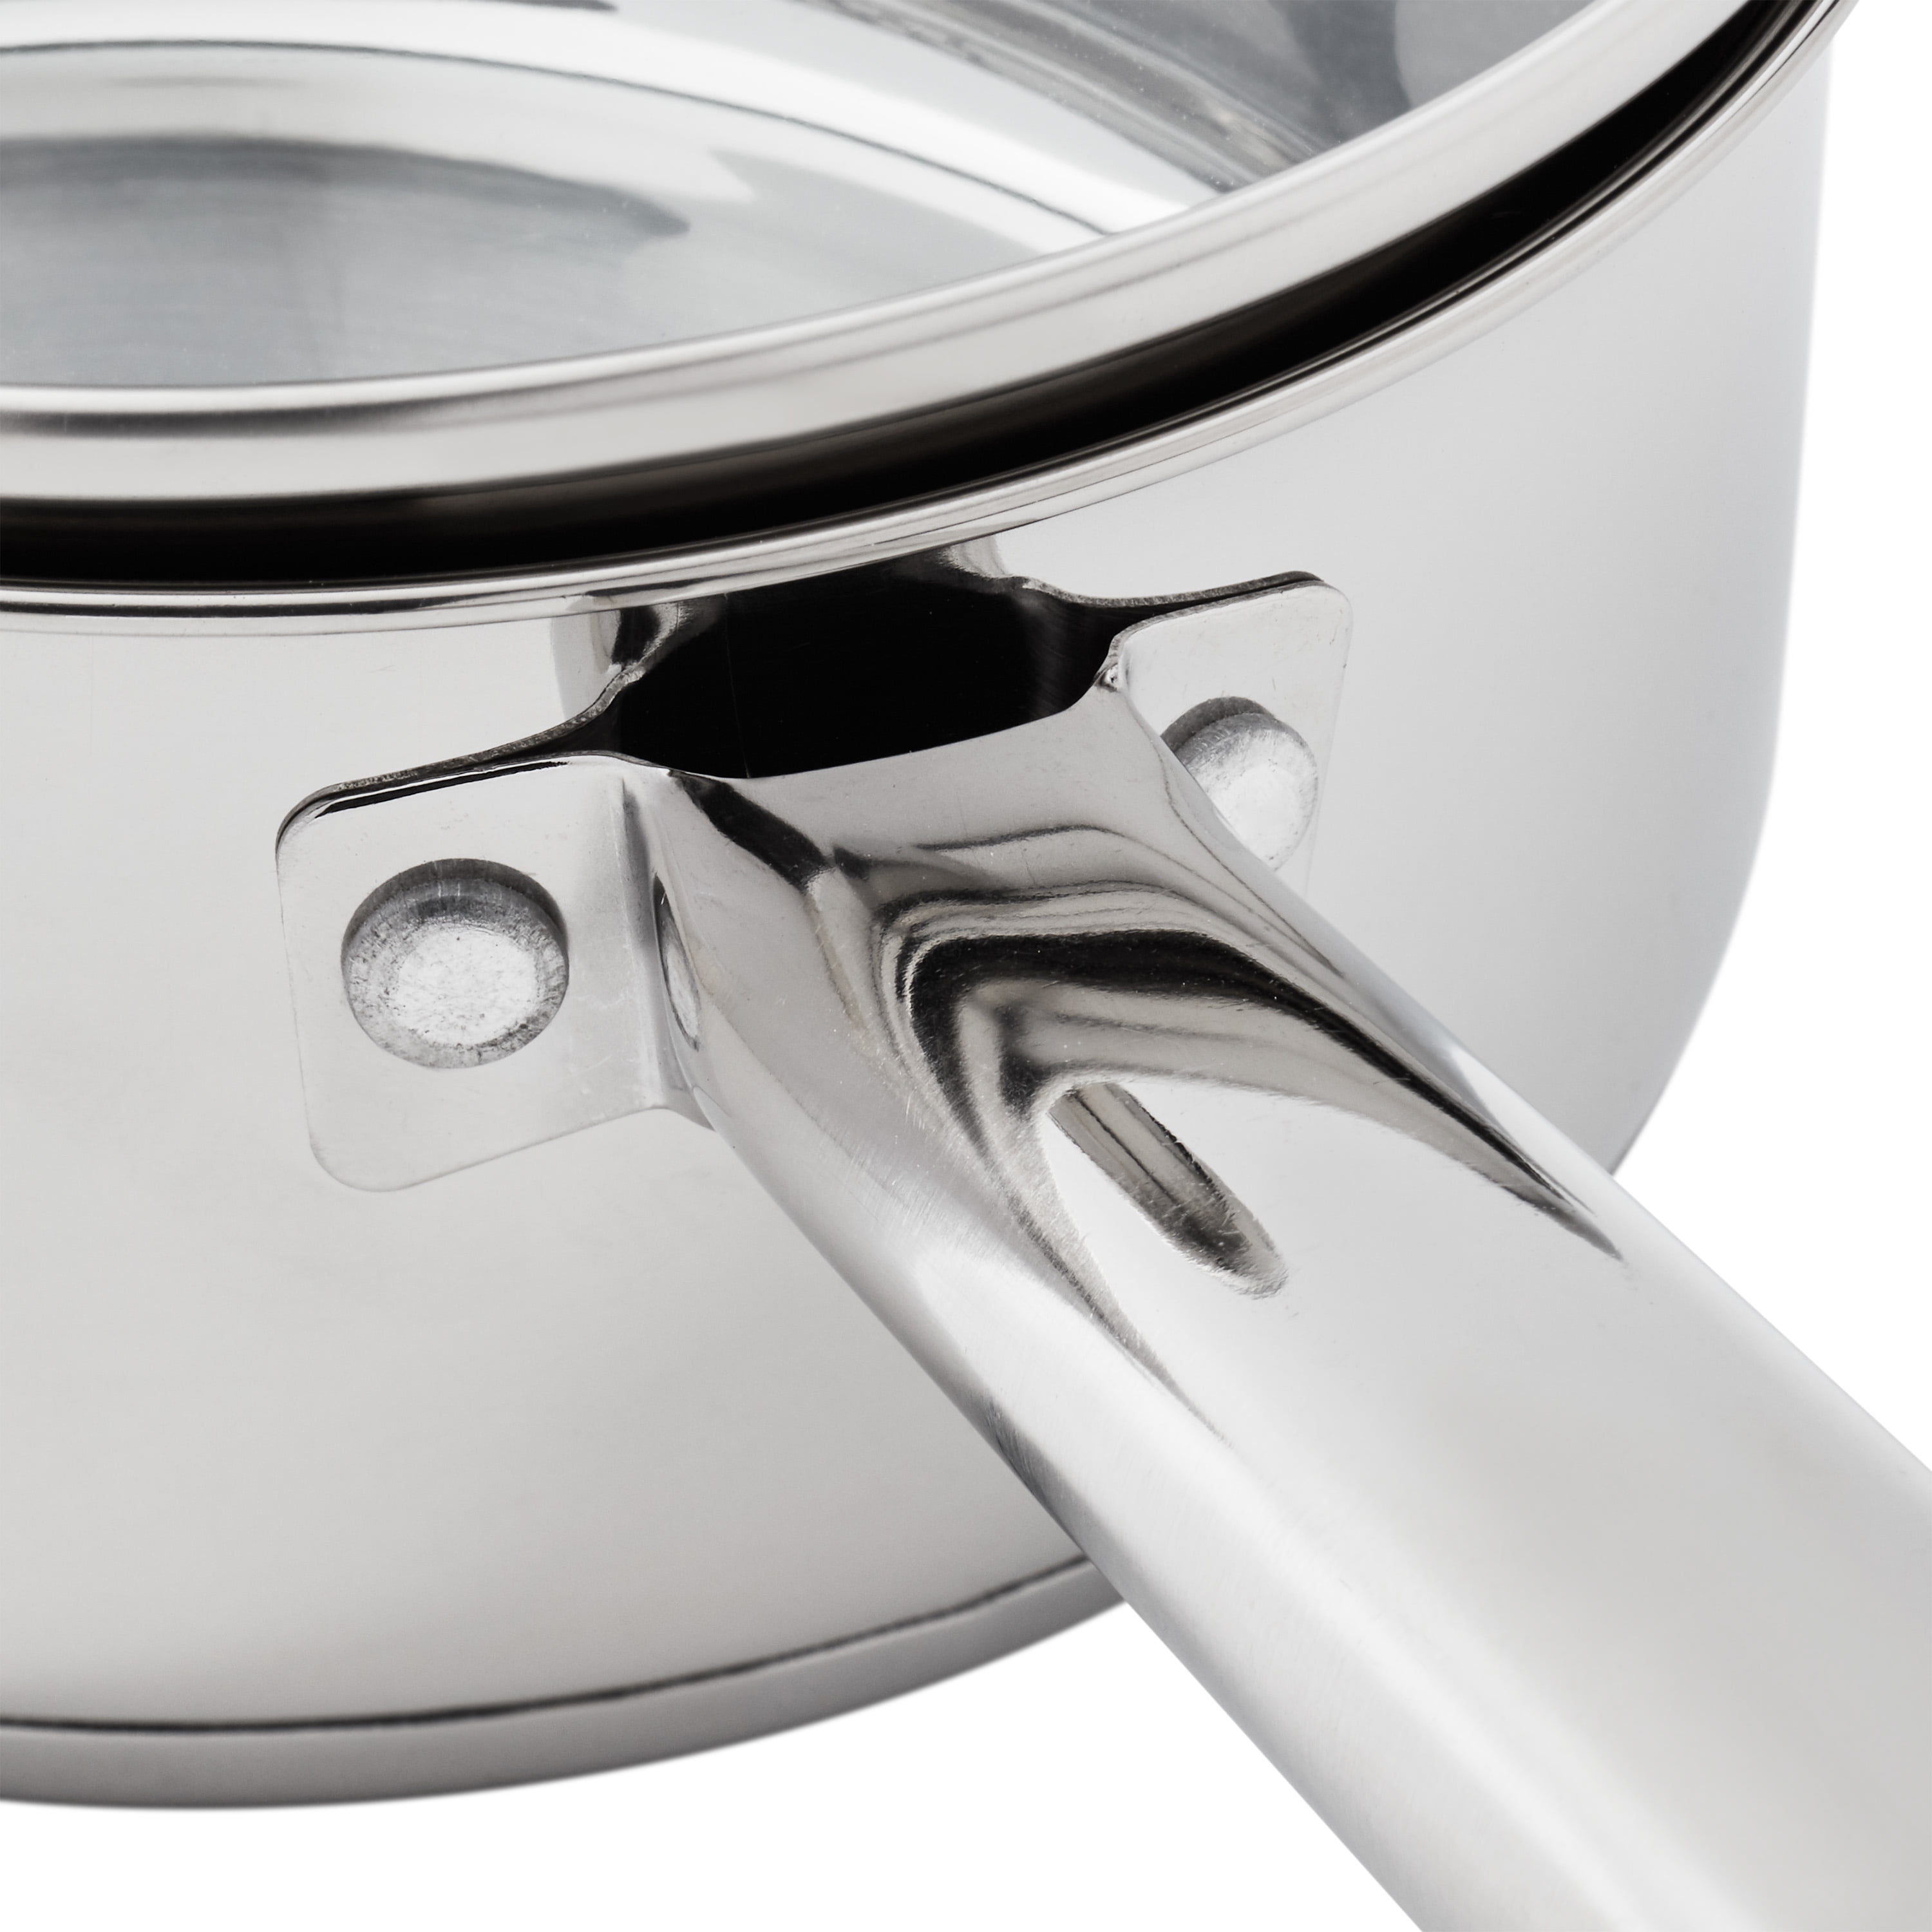 1.5 quart Sauce Pan with Straining Lid - Whisk